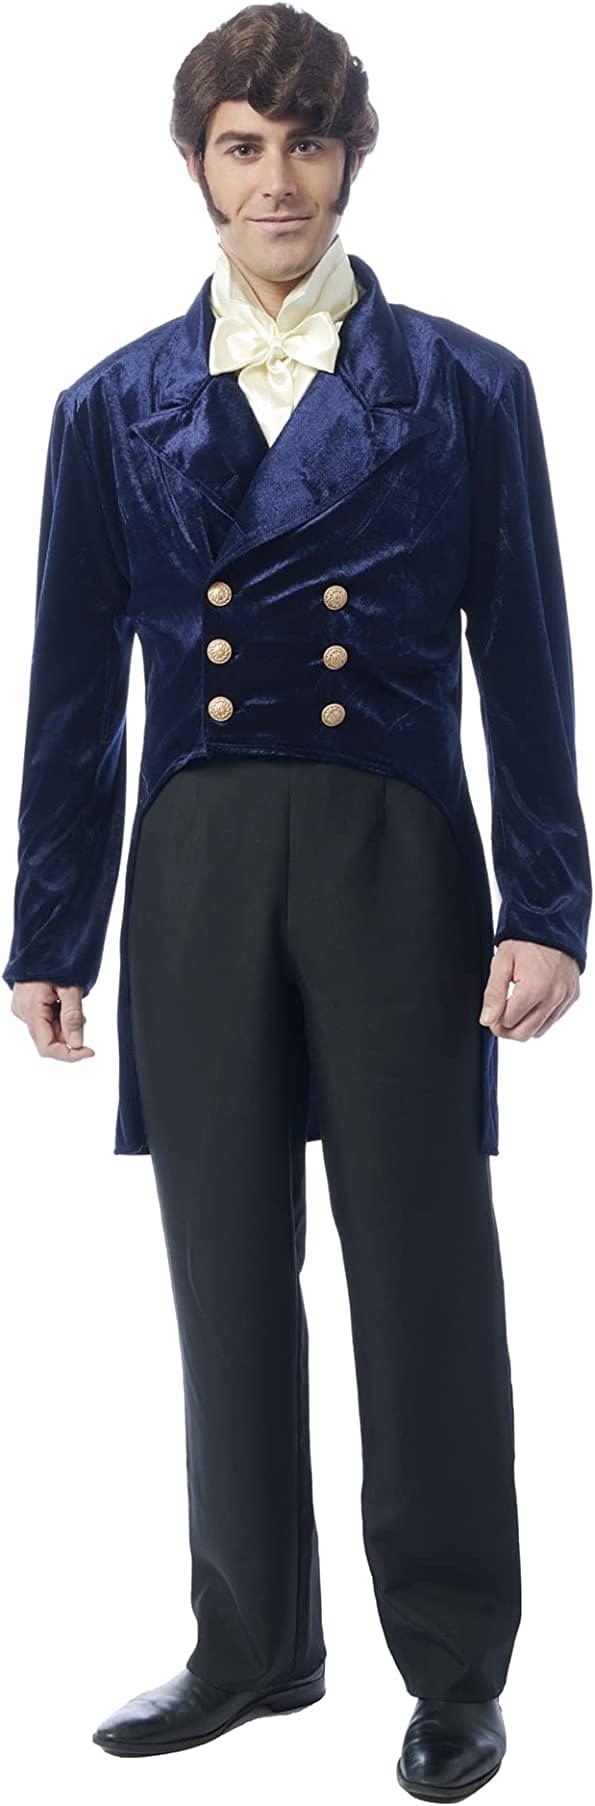 Regency Nobleman Adult Costume | X-Large | Free Shipping